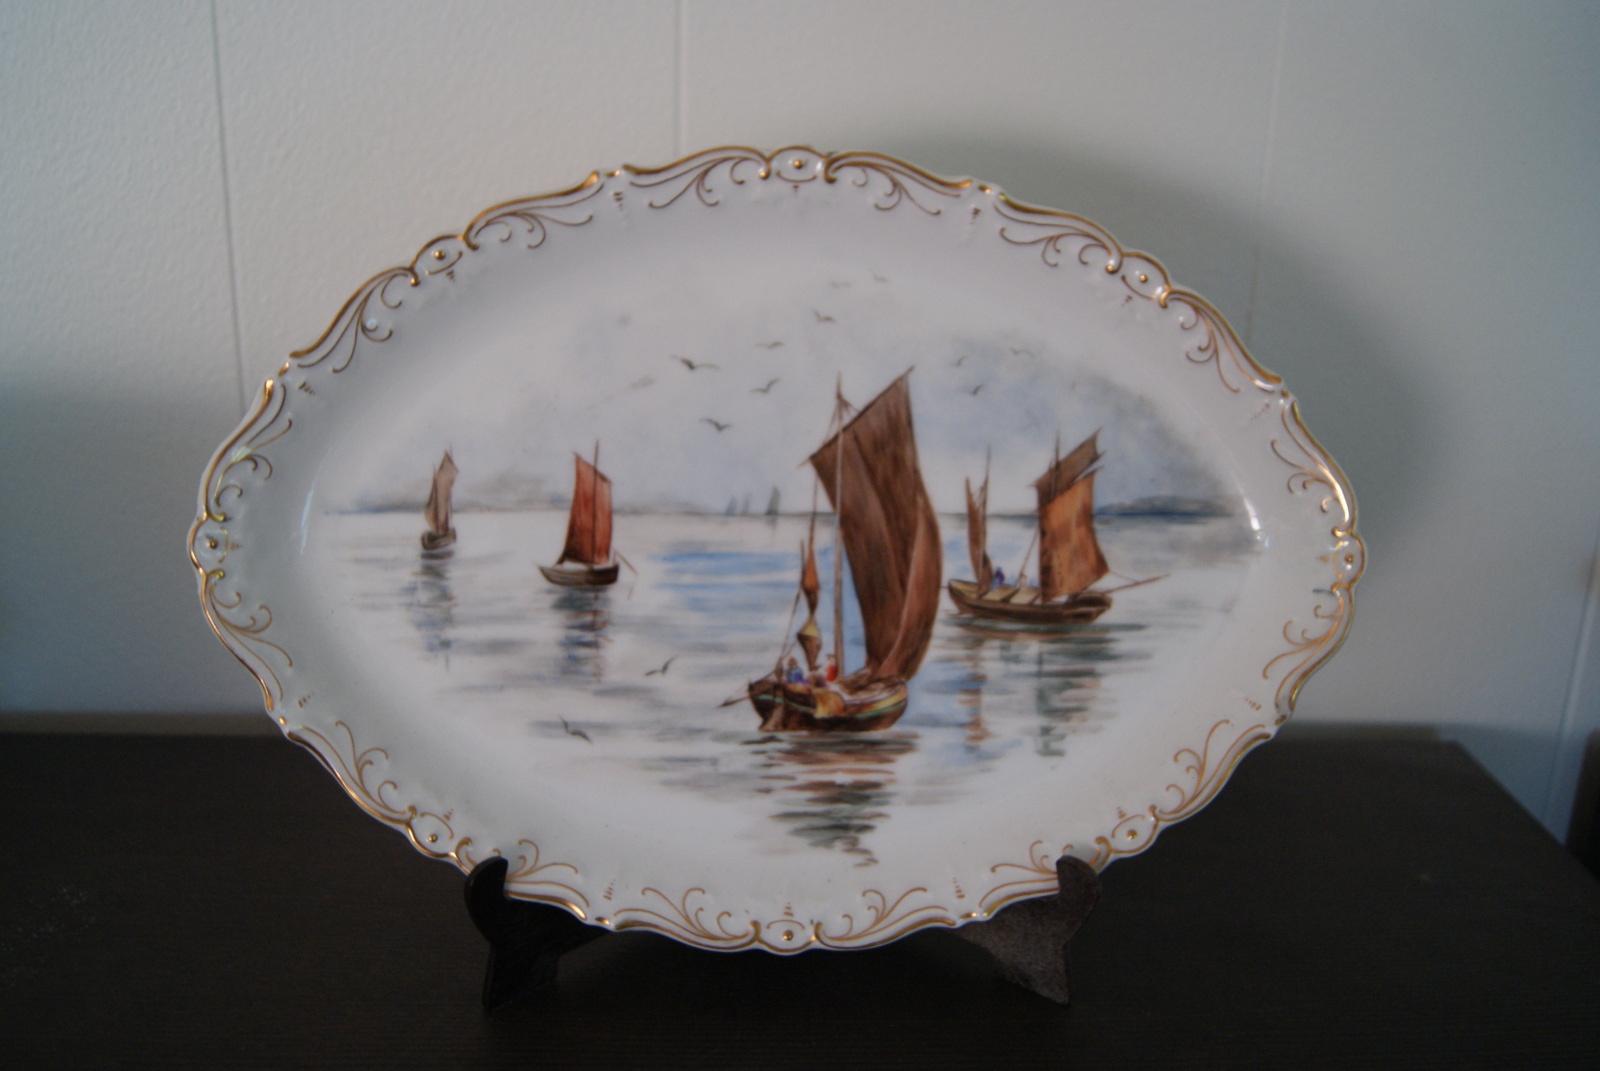 Niedersaltzbrunn dish with relief and with hand painted landscape with boats